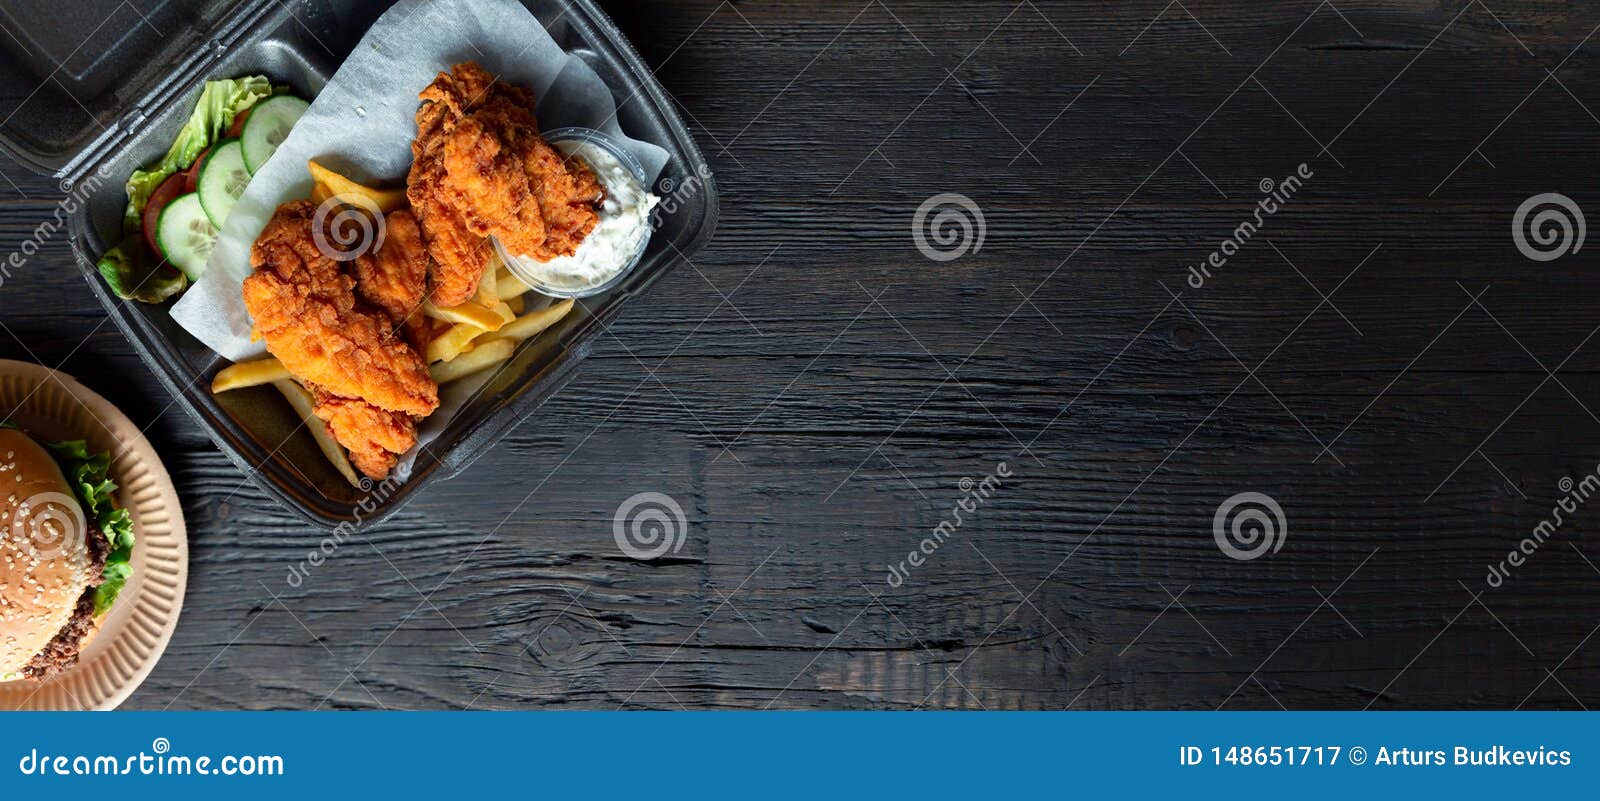 hamburger, french fries and fried chicken in takeaway containers on the wooden background. food delivery and fast food concept.